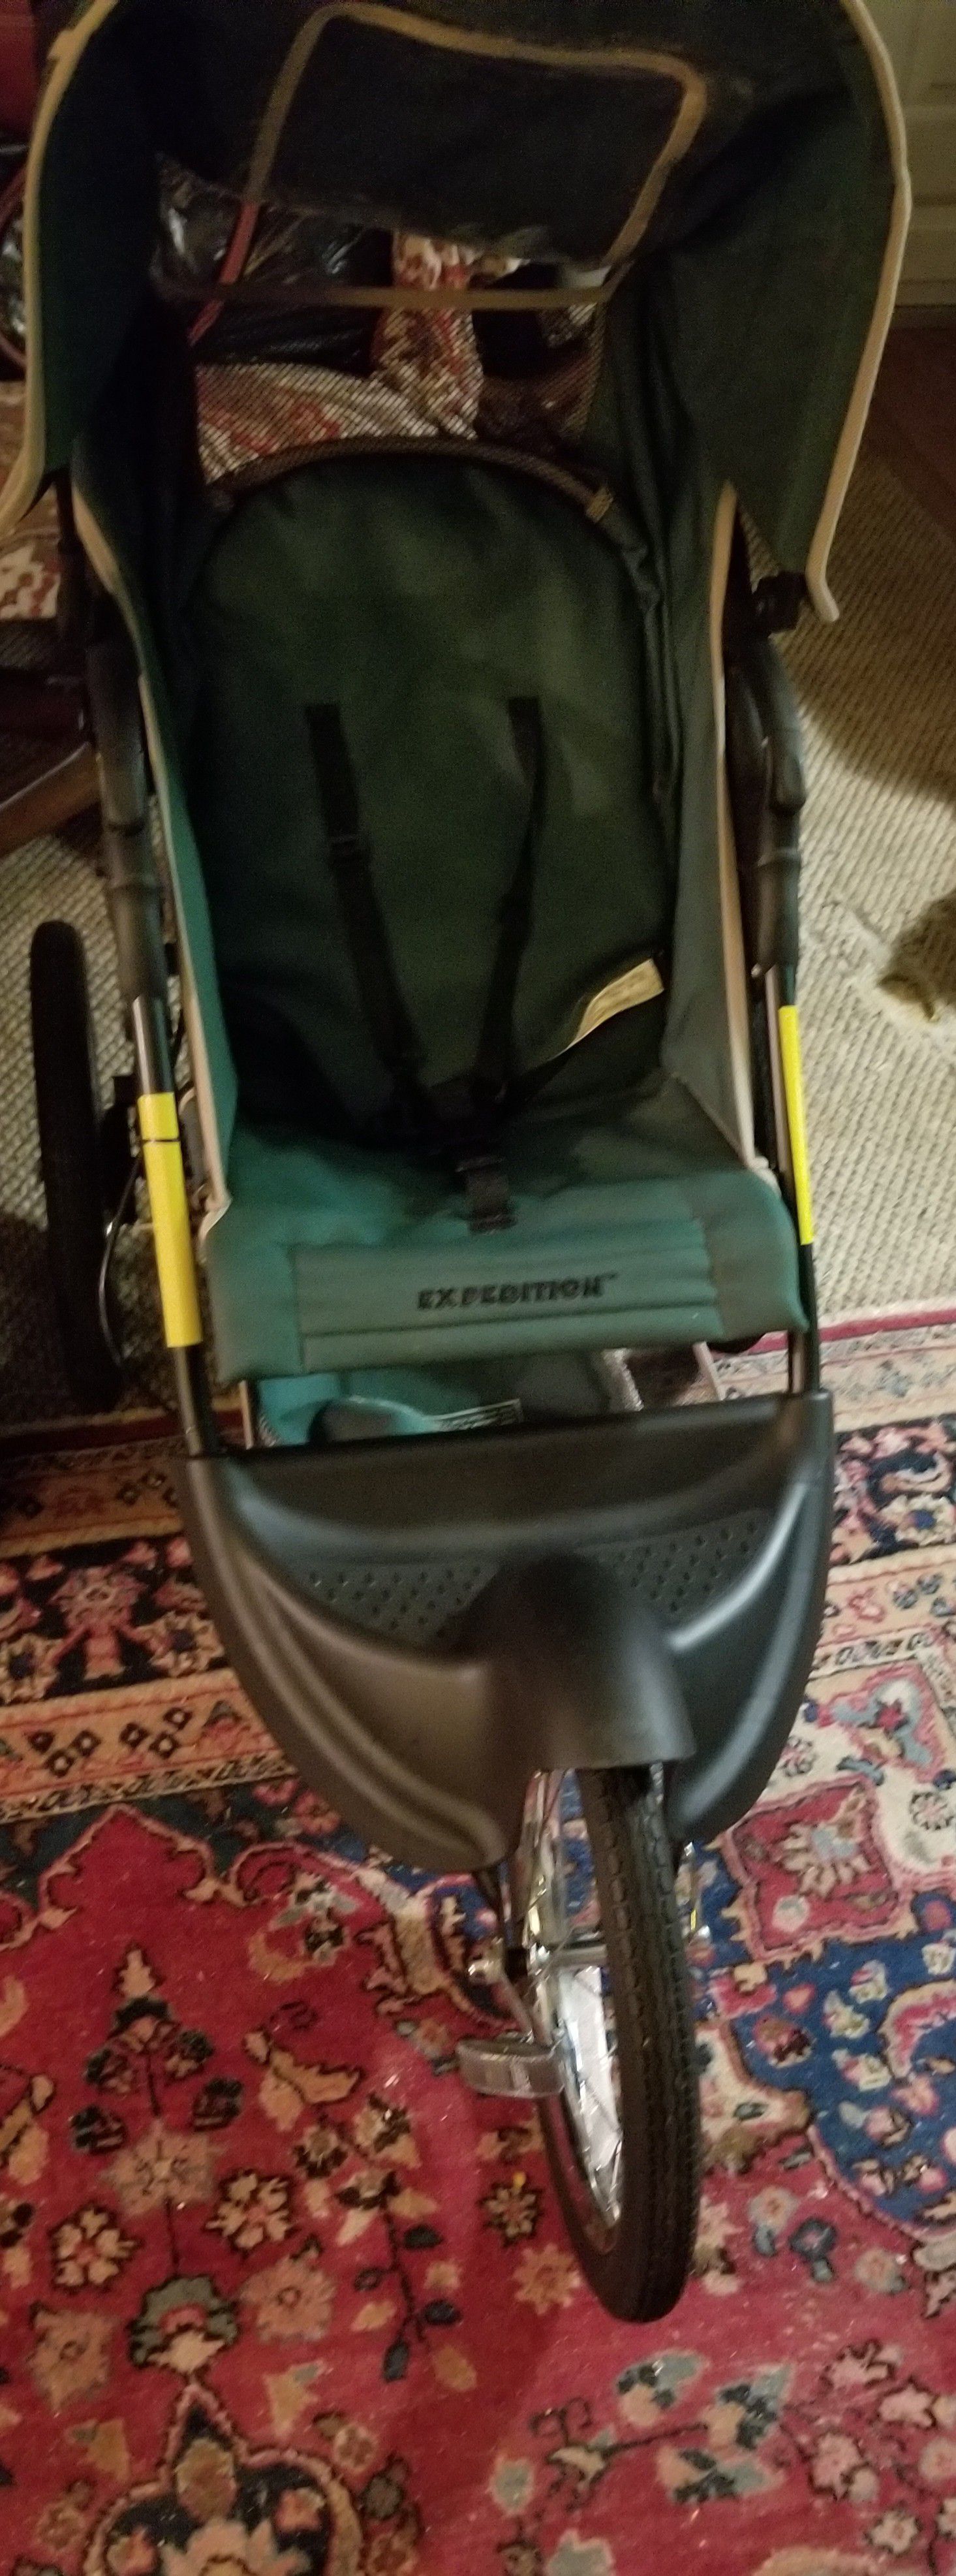 Baby Trends Expefition jogging stroller